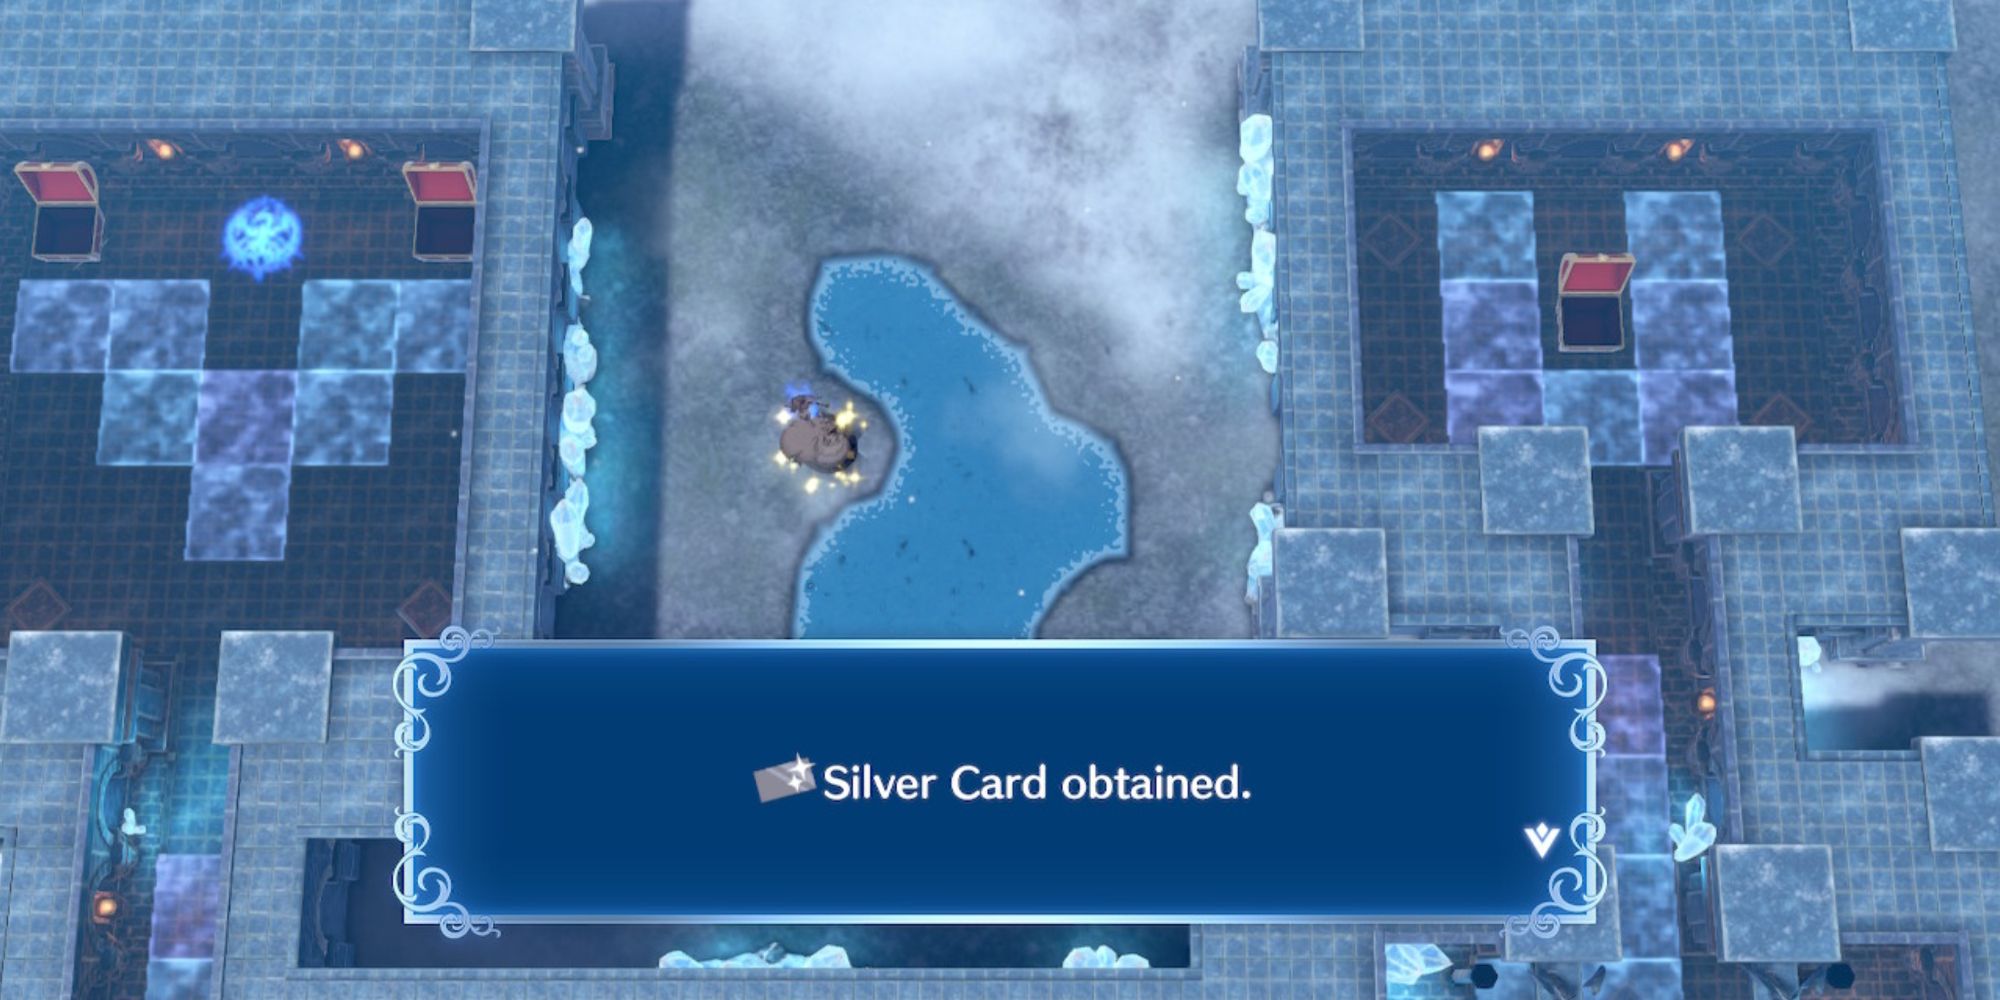 Celine picking up the Silver Card in Fire Emblem Engage after "Waiting" on the sparkly tile near the heart-shaped pond on the outside of the Dragon Temple arena.